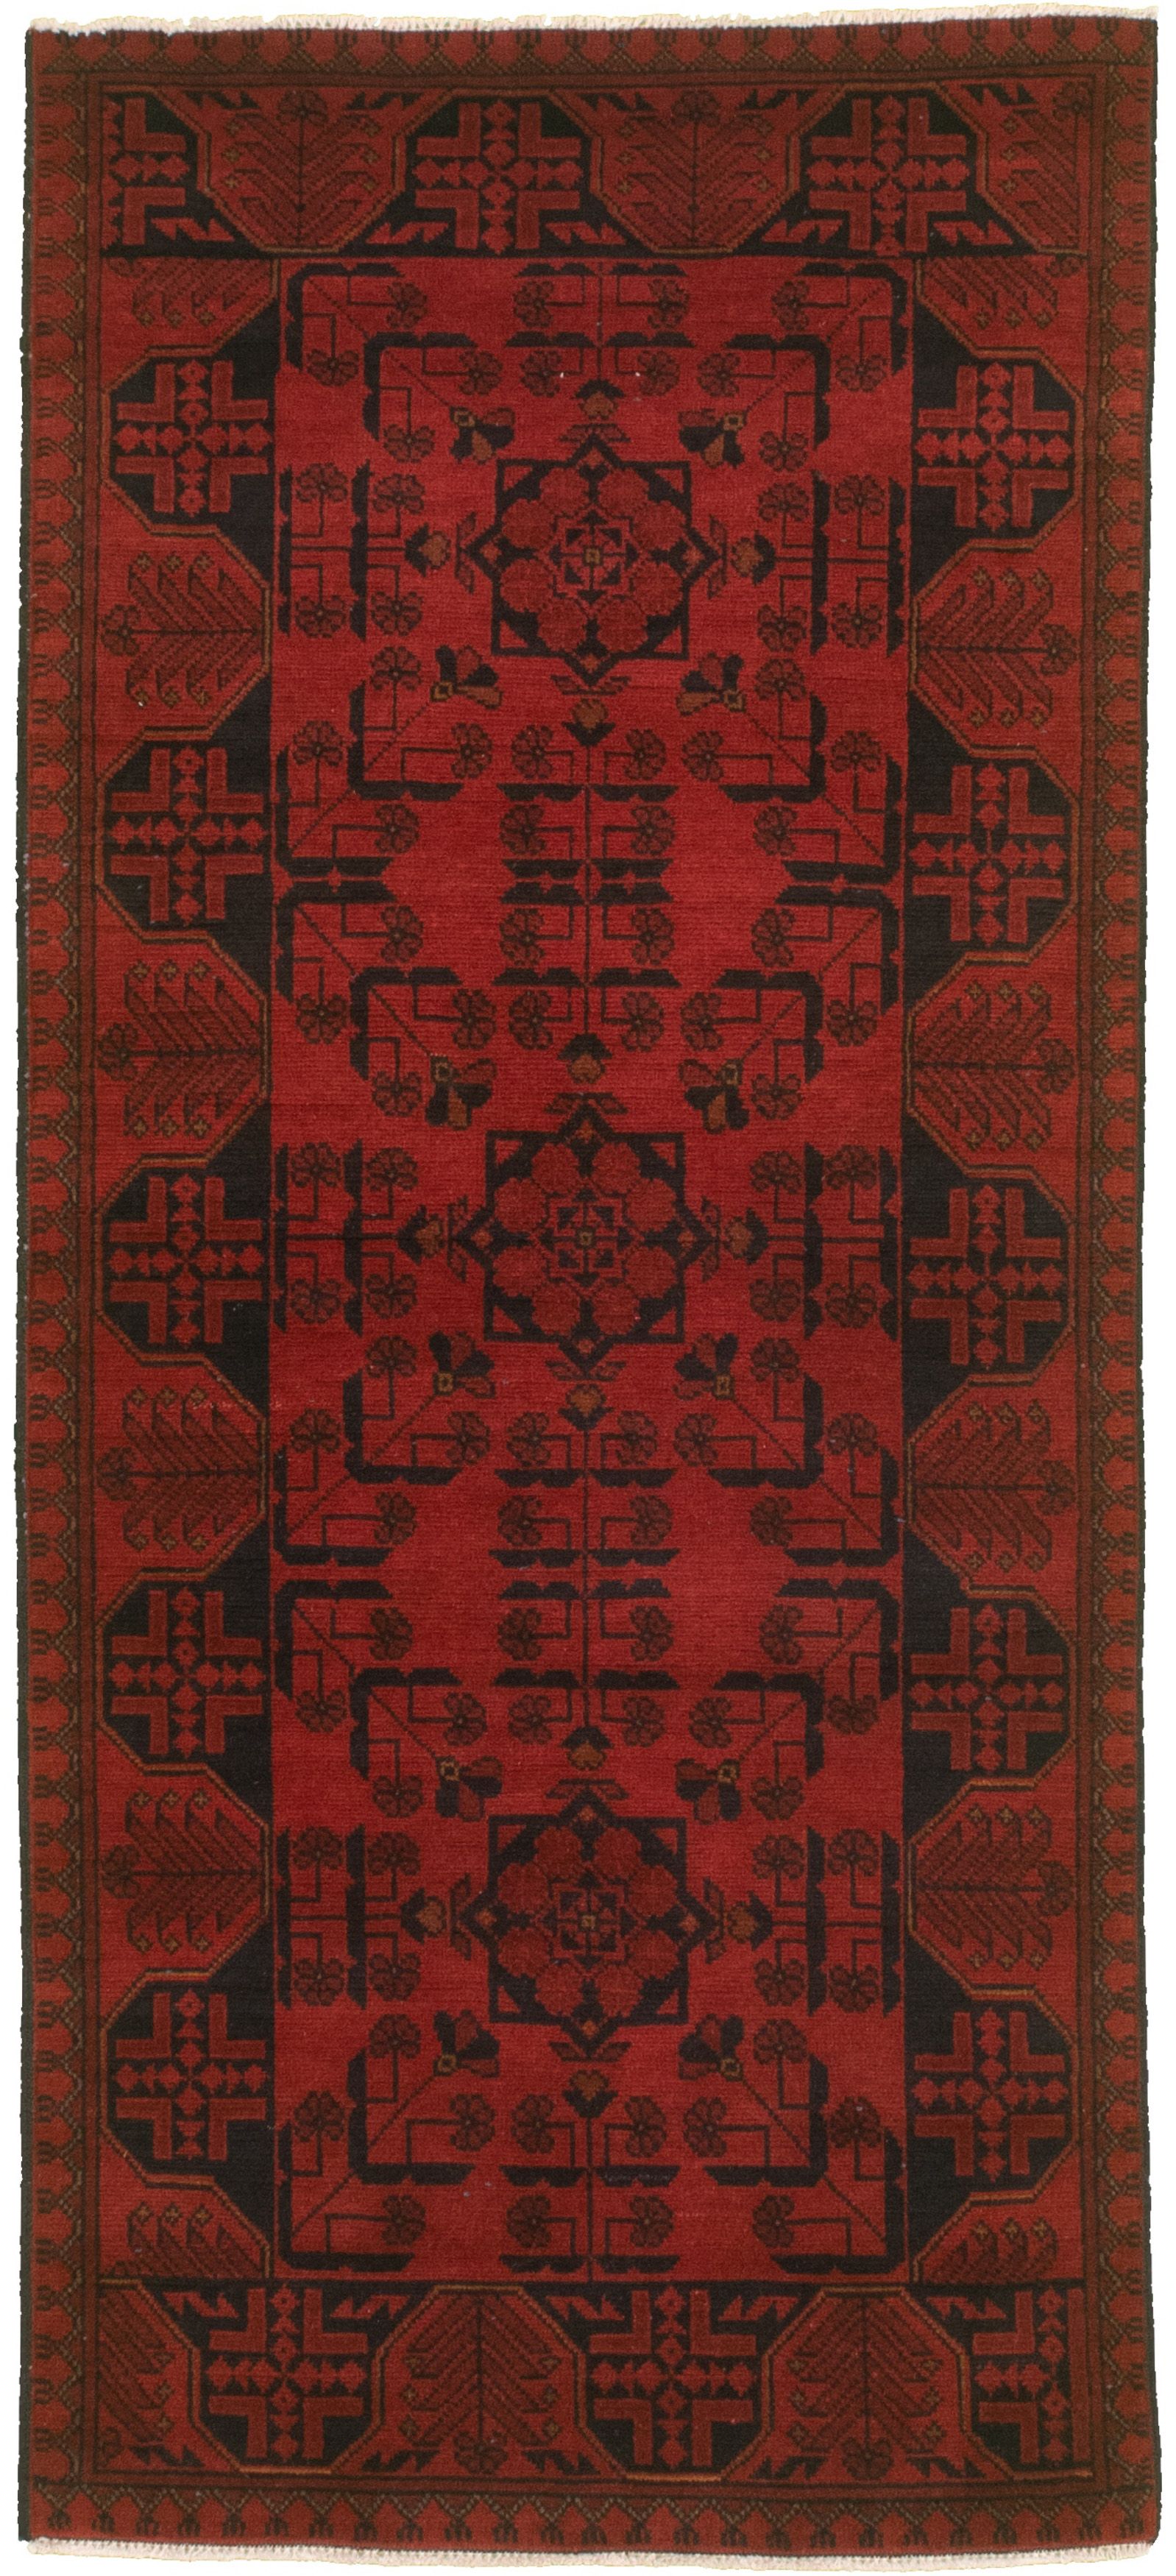 Hand-knotted Finest Khal Mohammadi Red  Rug 2'9" x 6'3" Size: 2'9" x 6'3"  